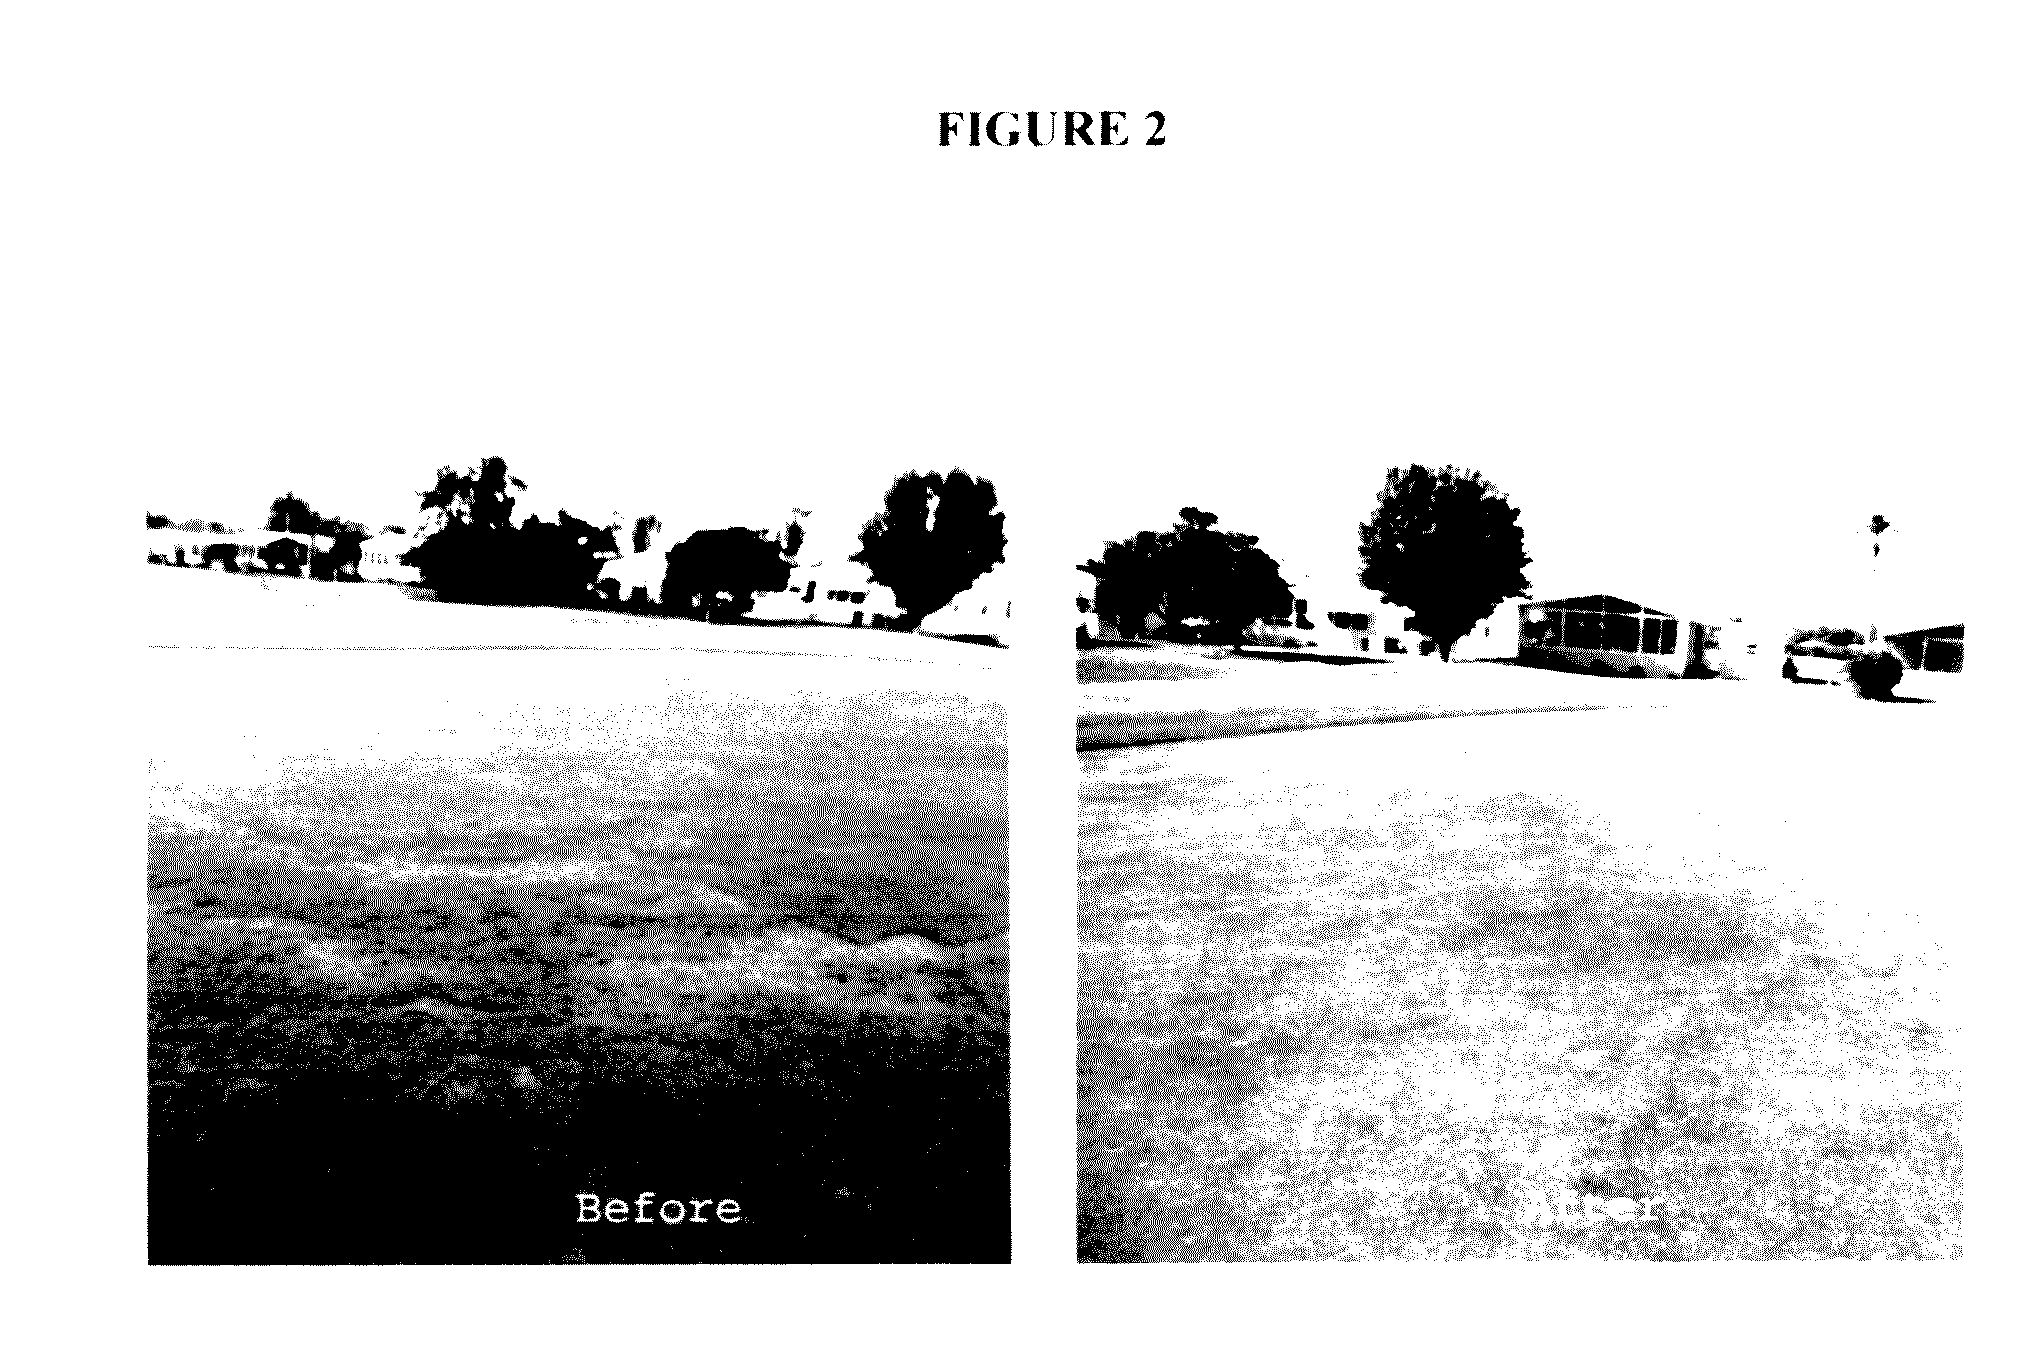 Compositions and methods for improving plant health